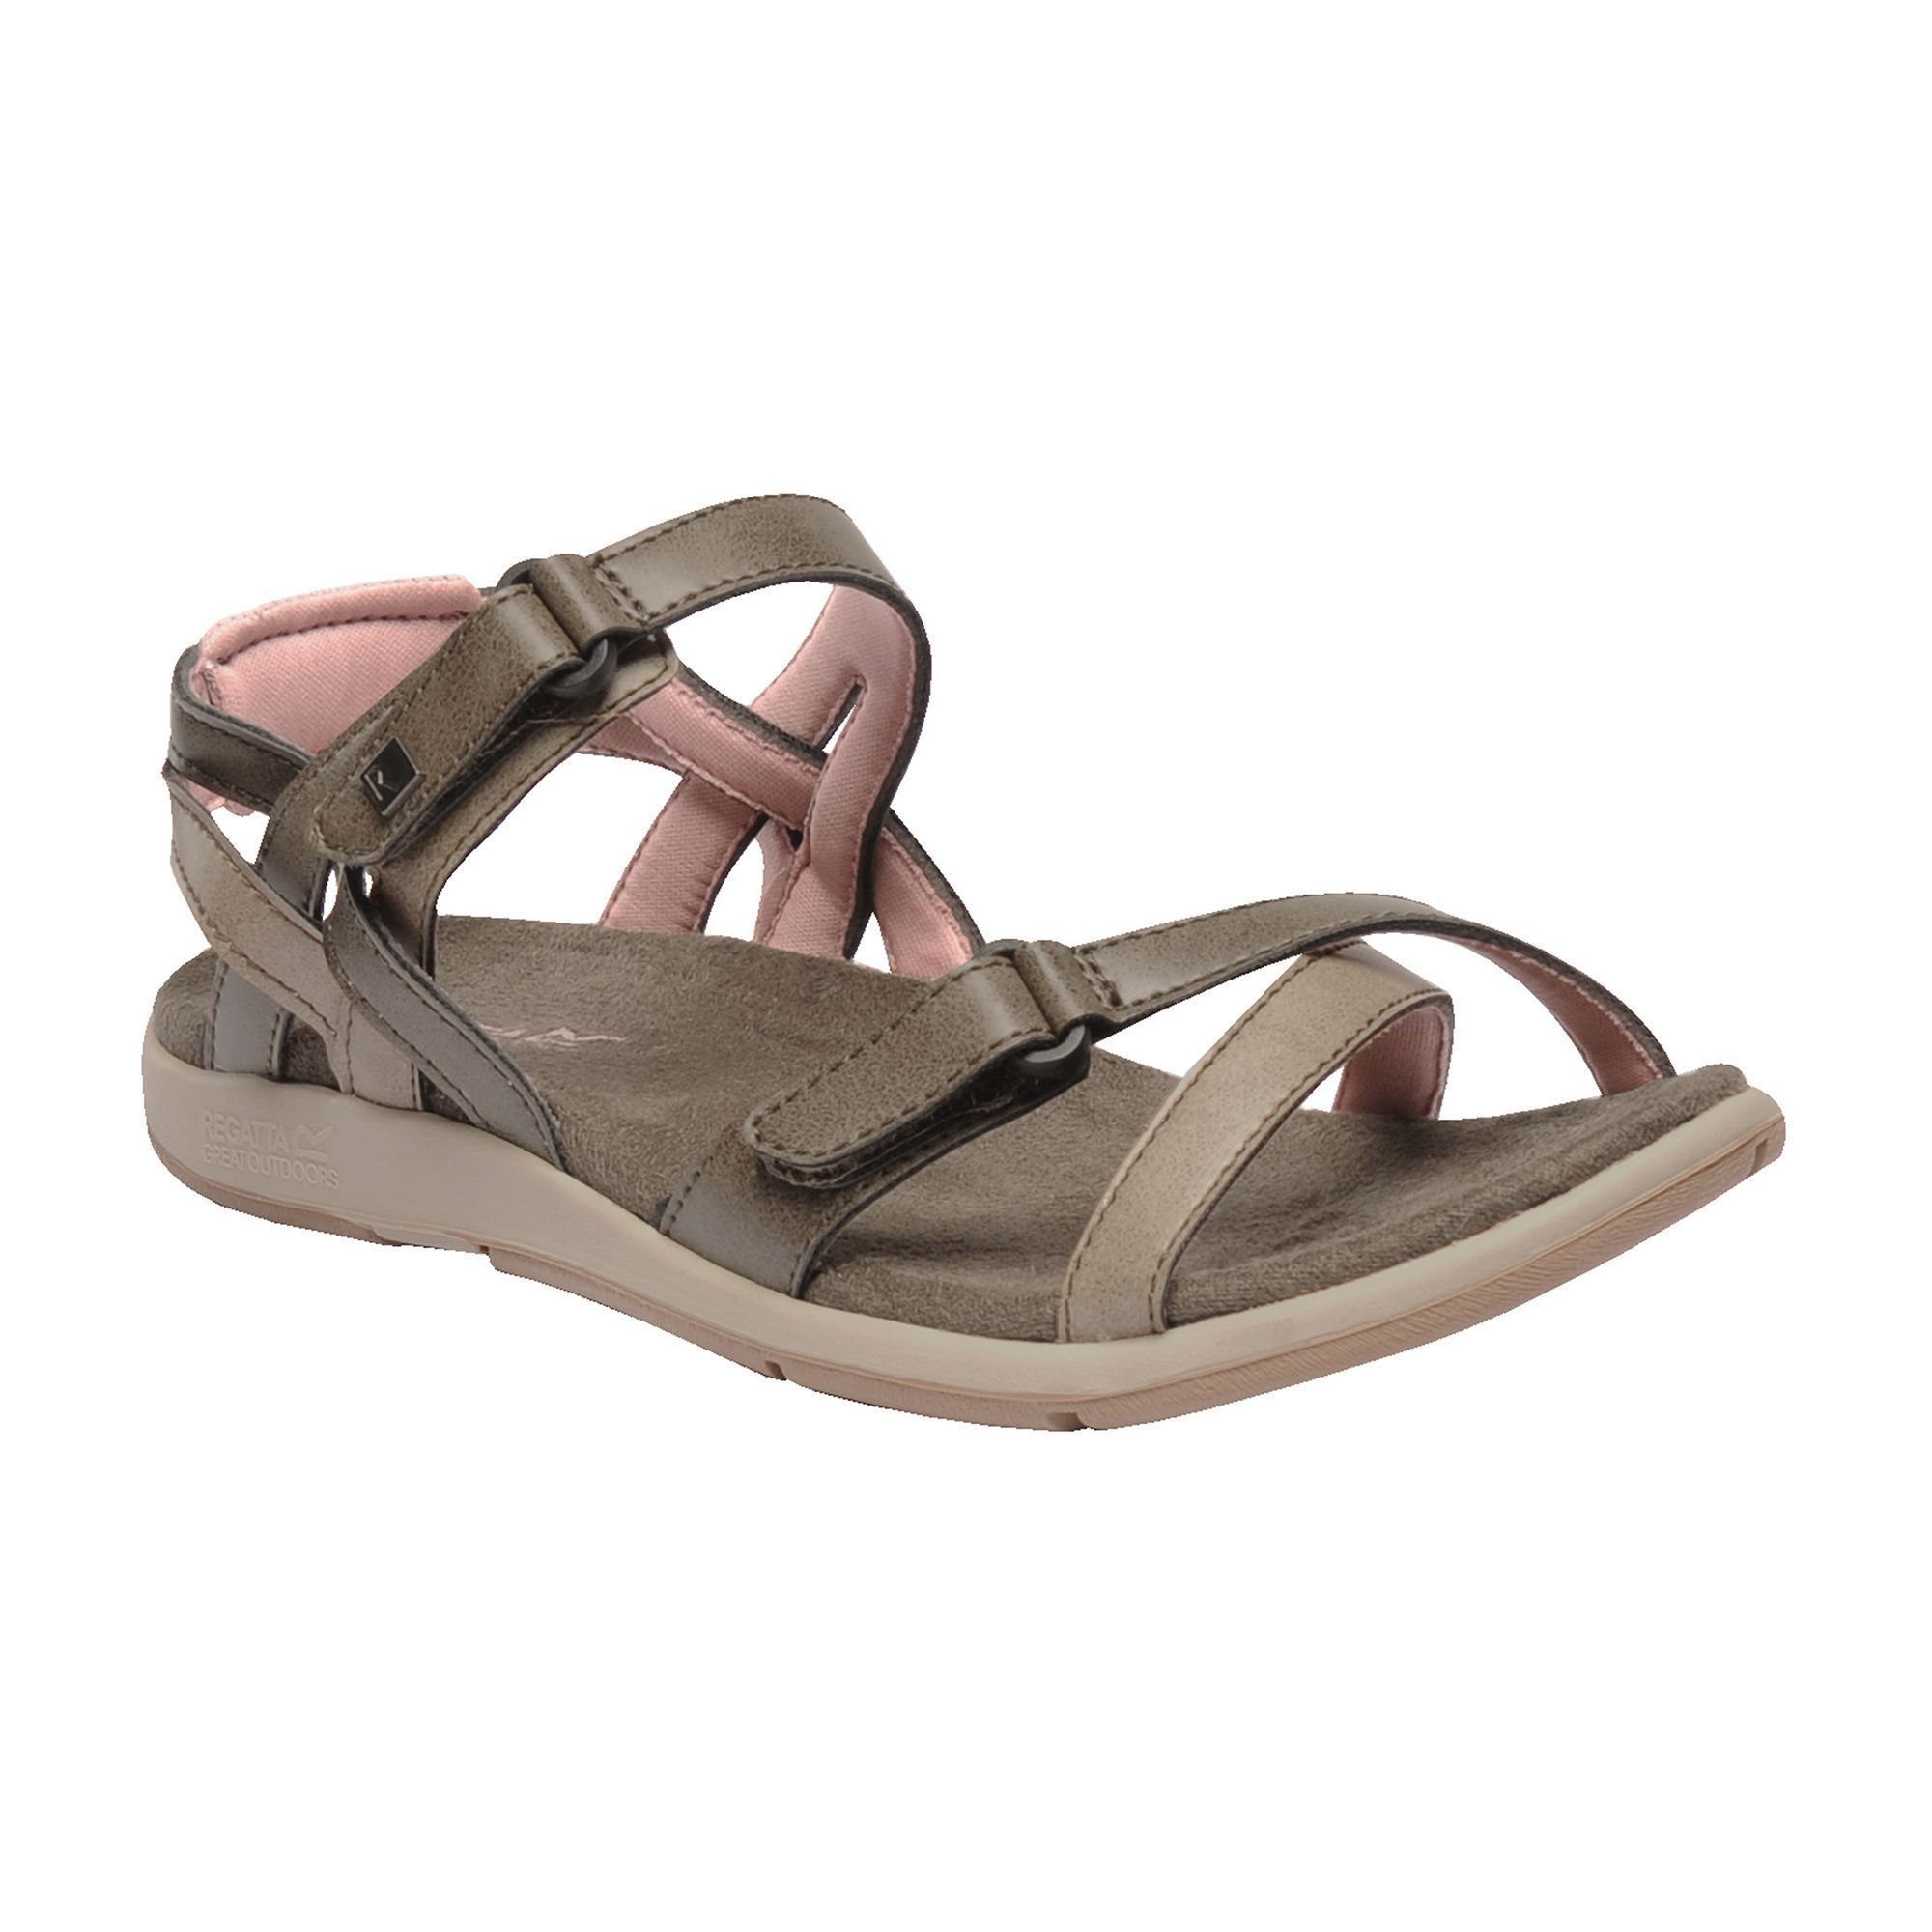 Buy > best rated walking sandals > in stock